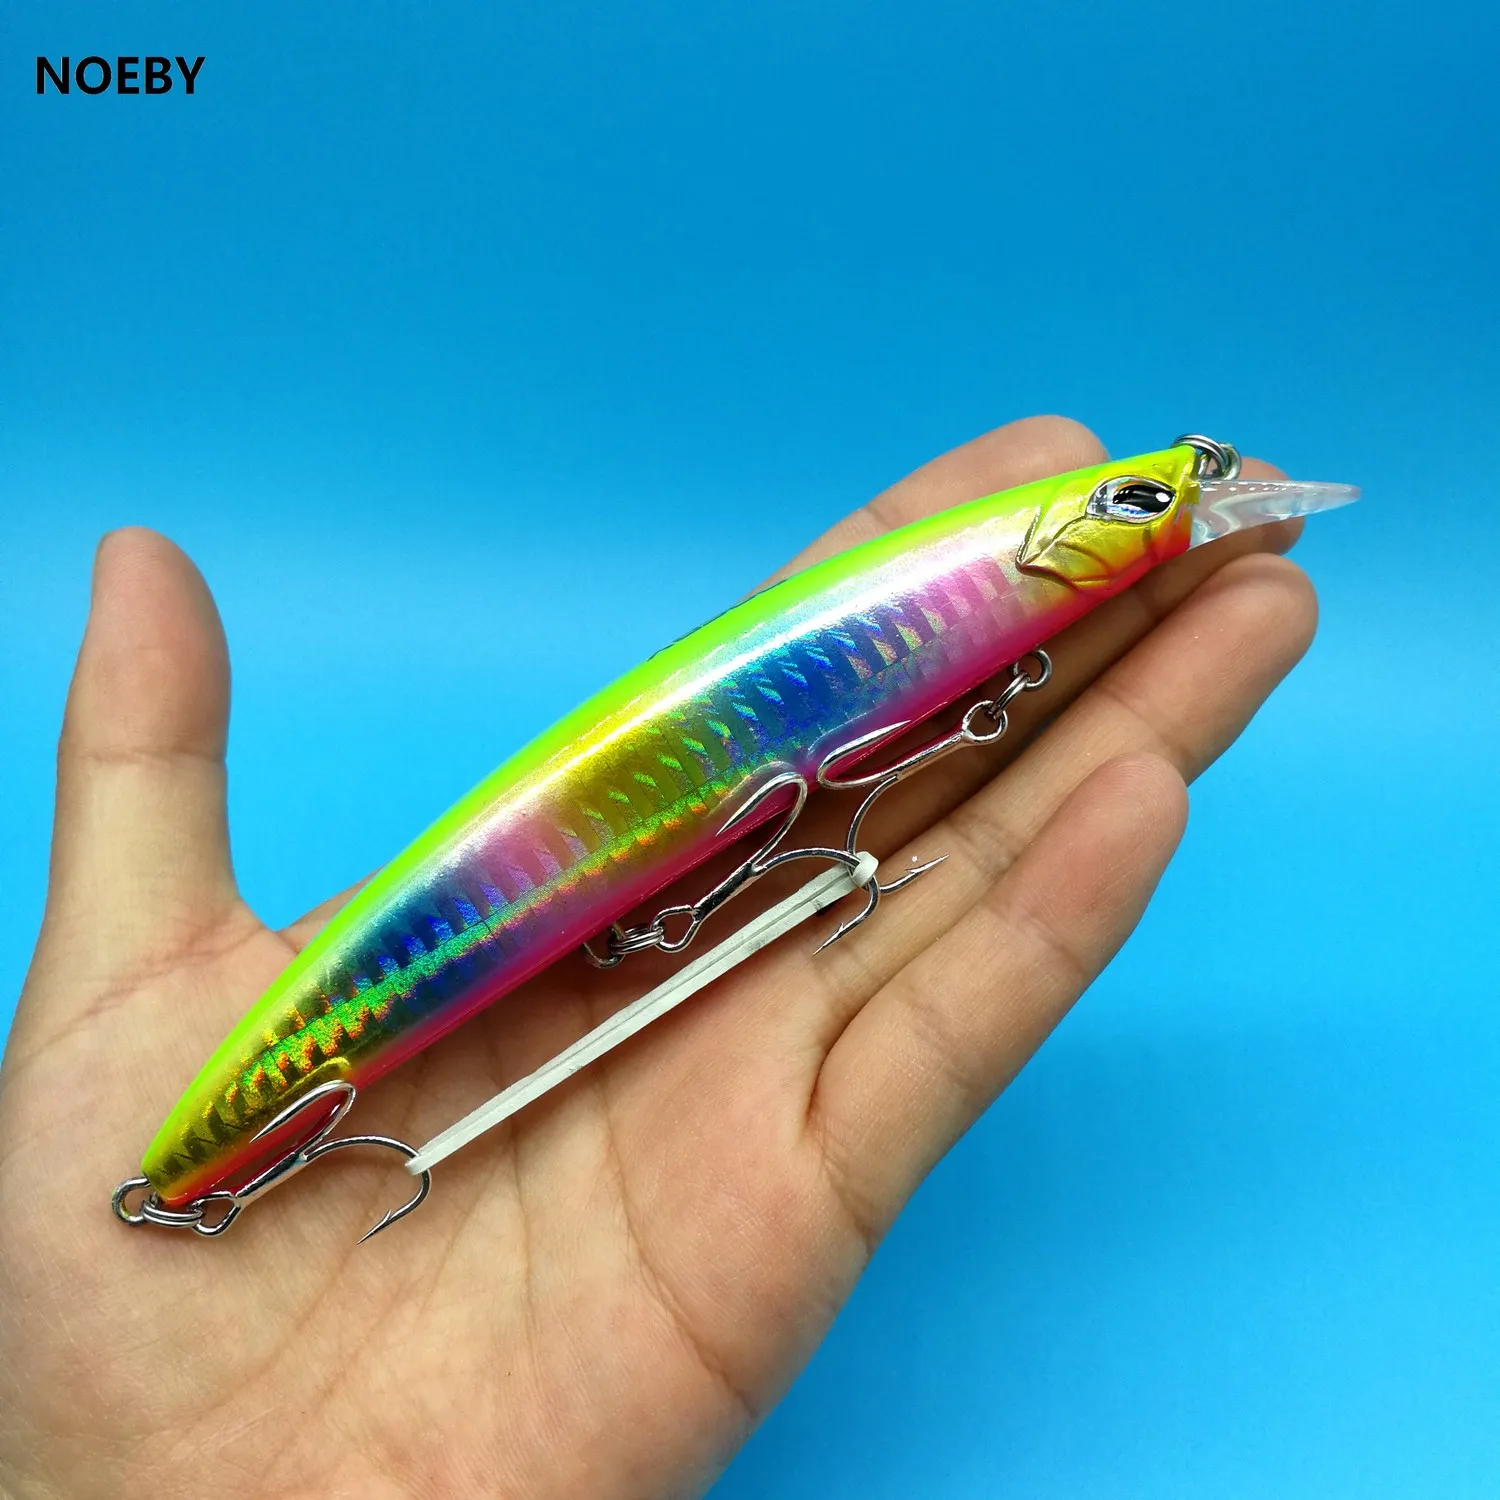 Noeby 2 قطع 2019 New Floating Minnow Fishing Lure 23g130mm عمق 015m Wobbler Hard Saltwater Fishing Tackle T202870817